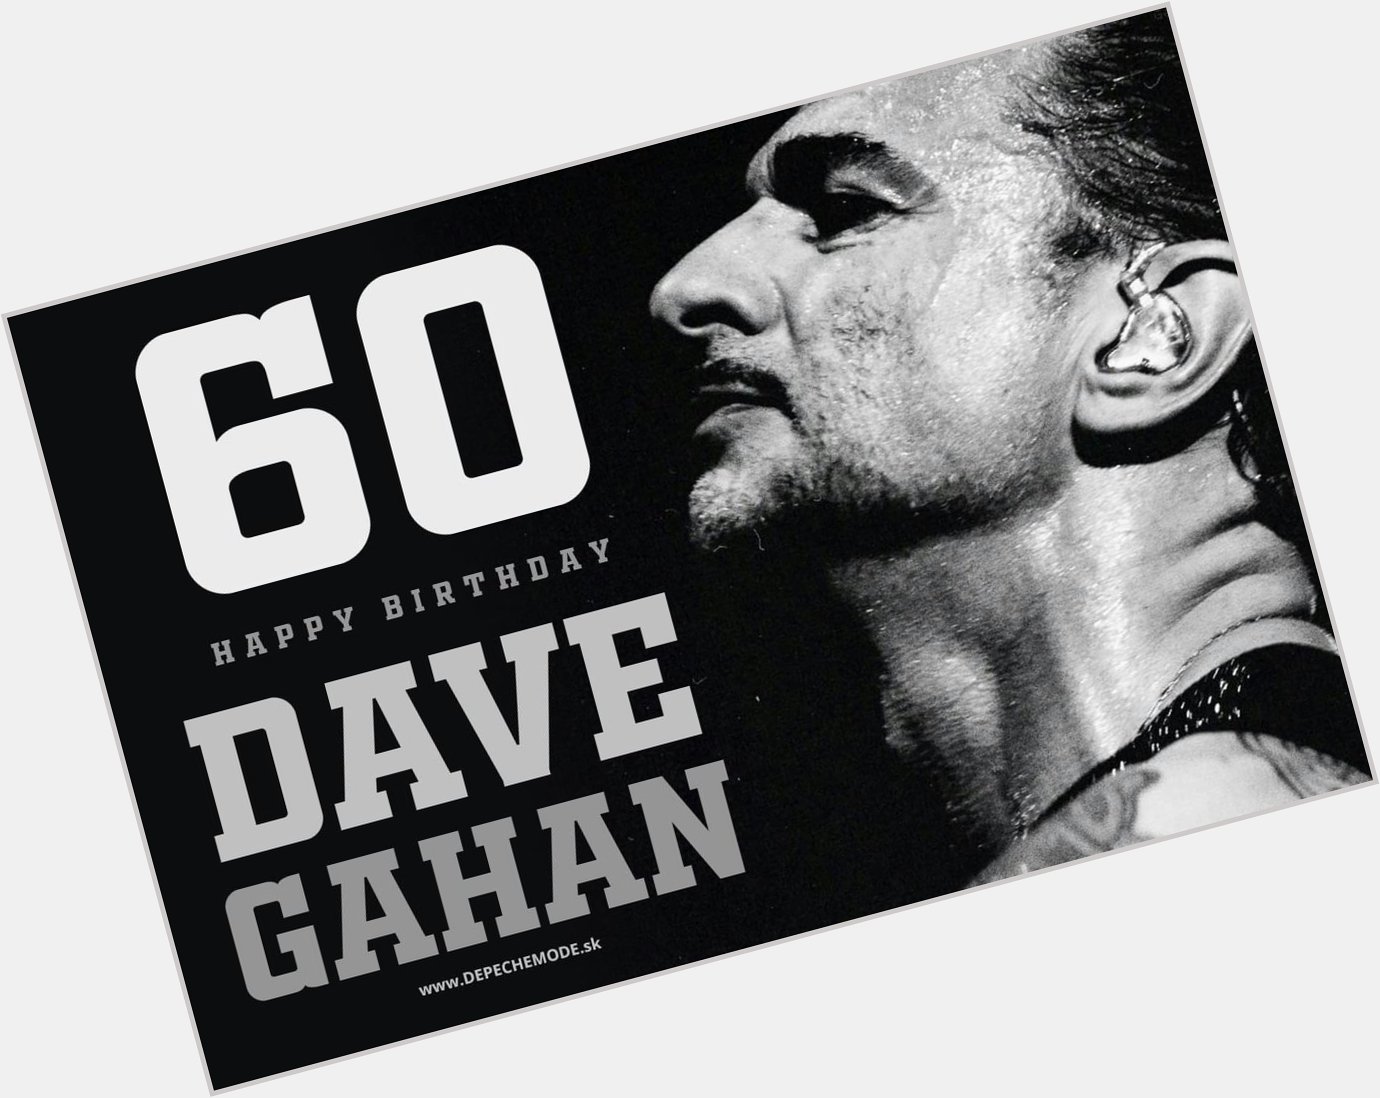 Happy birthday Dave!

Dave Gahan turns 60 today. Let\s wish him something nice... 